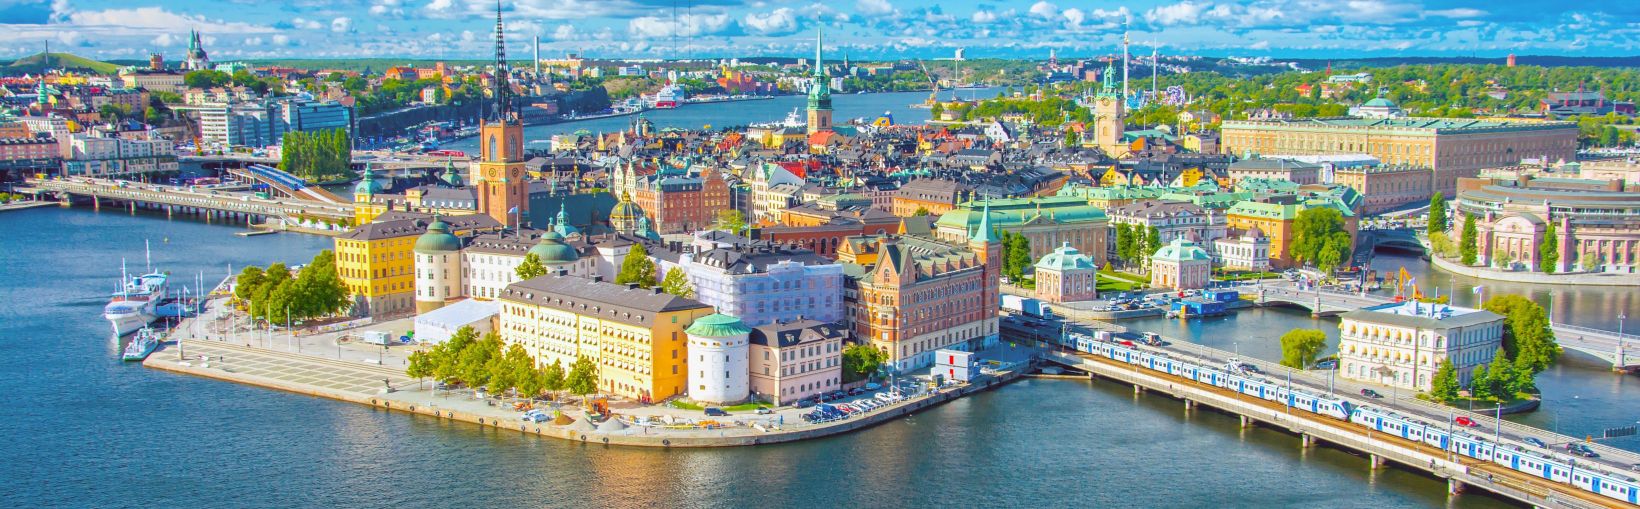 A panoramic view of bridges and buildings in central Stockholm with its mixture of traditional modern buildings, tall spires and all surrounded by water and low hills on a sunny day.